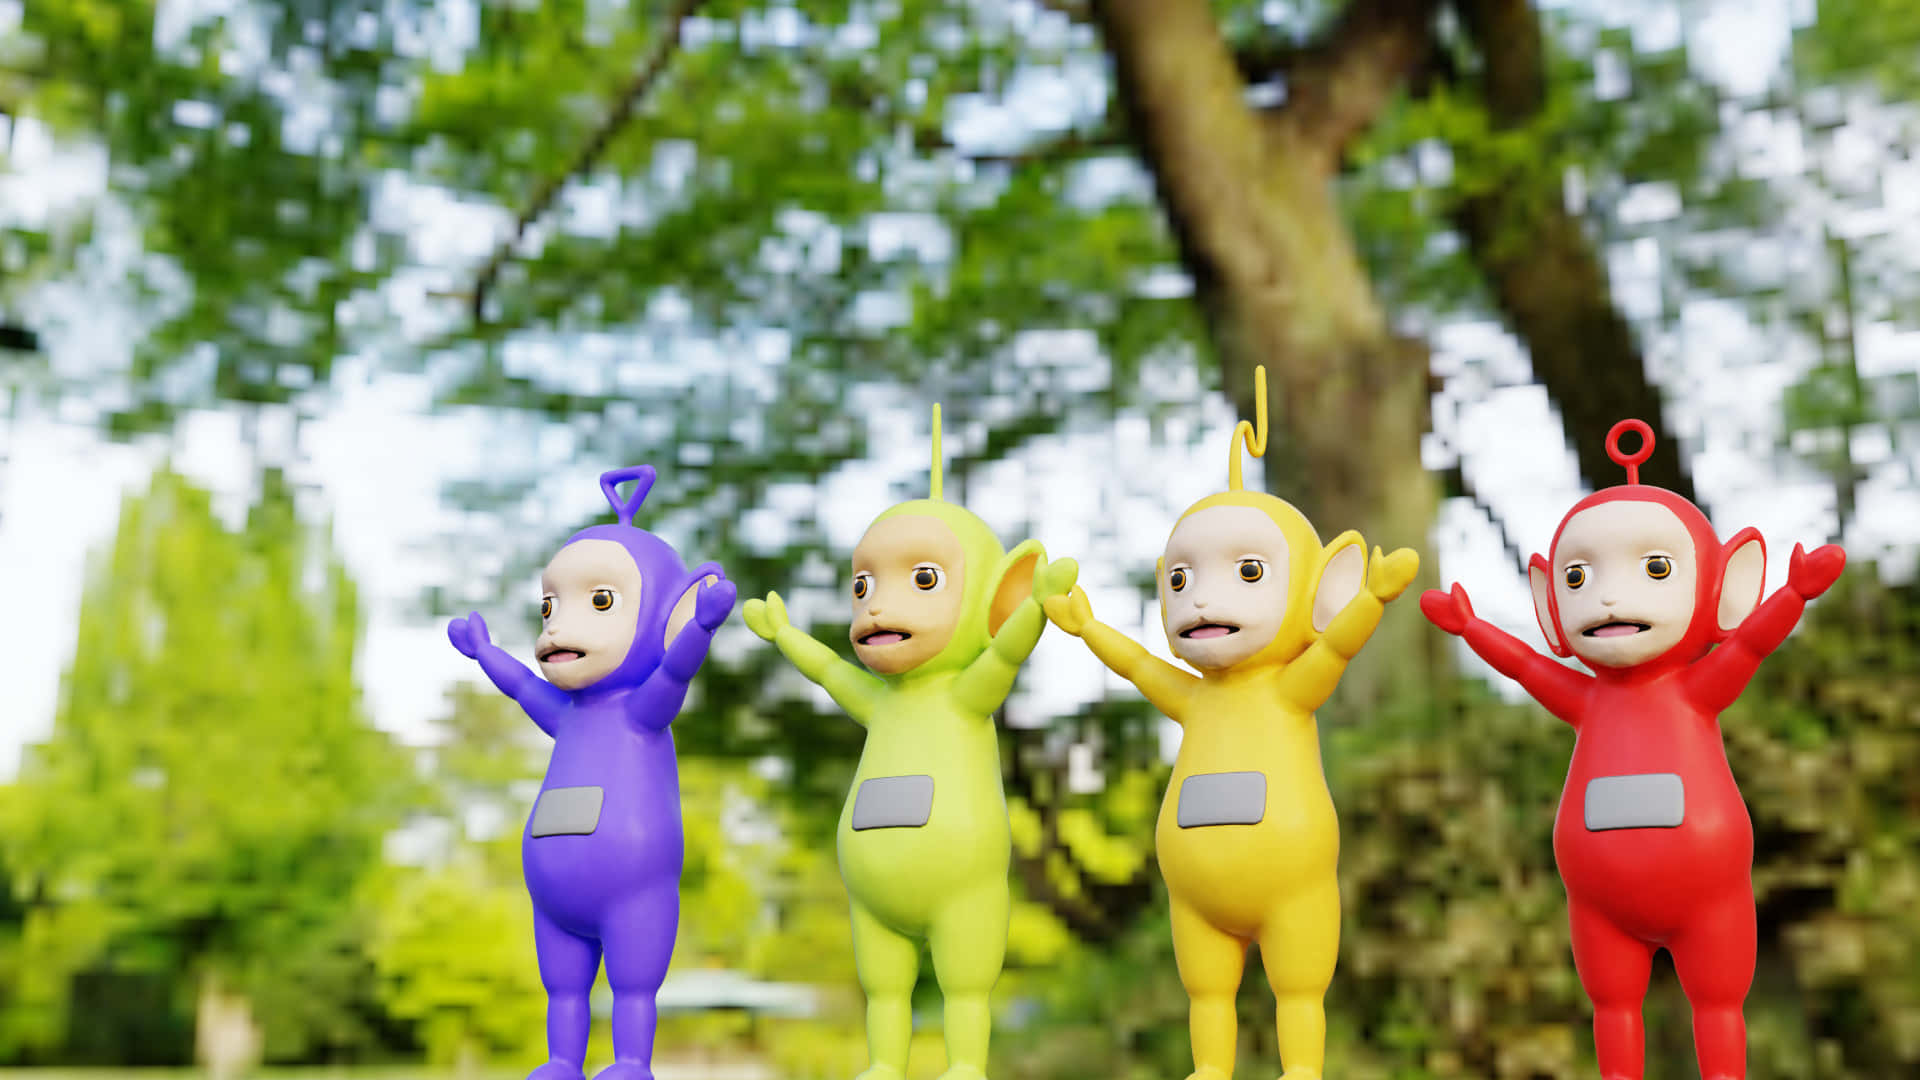 A Group Of Colorful Toys Standing In A Park